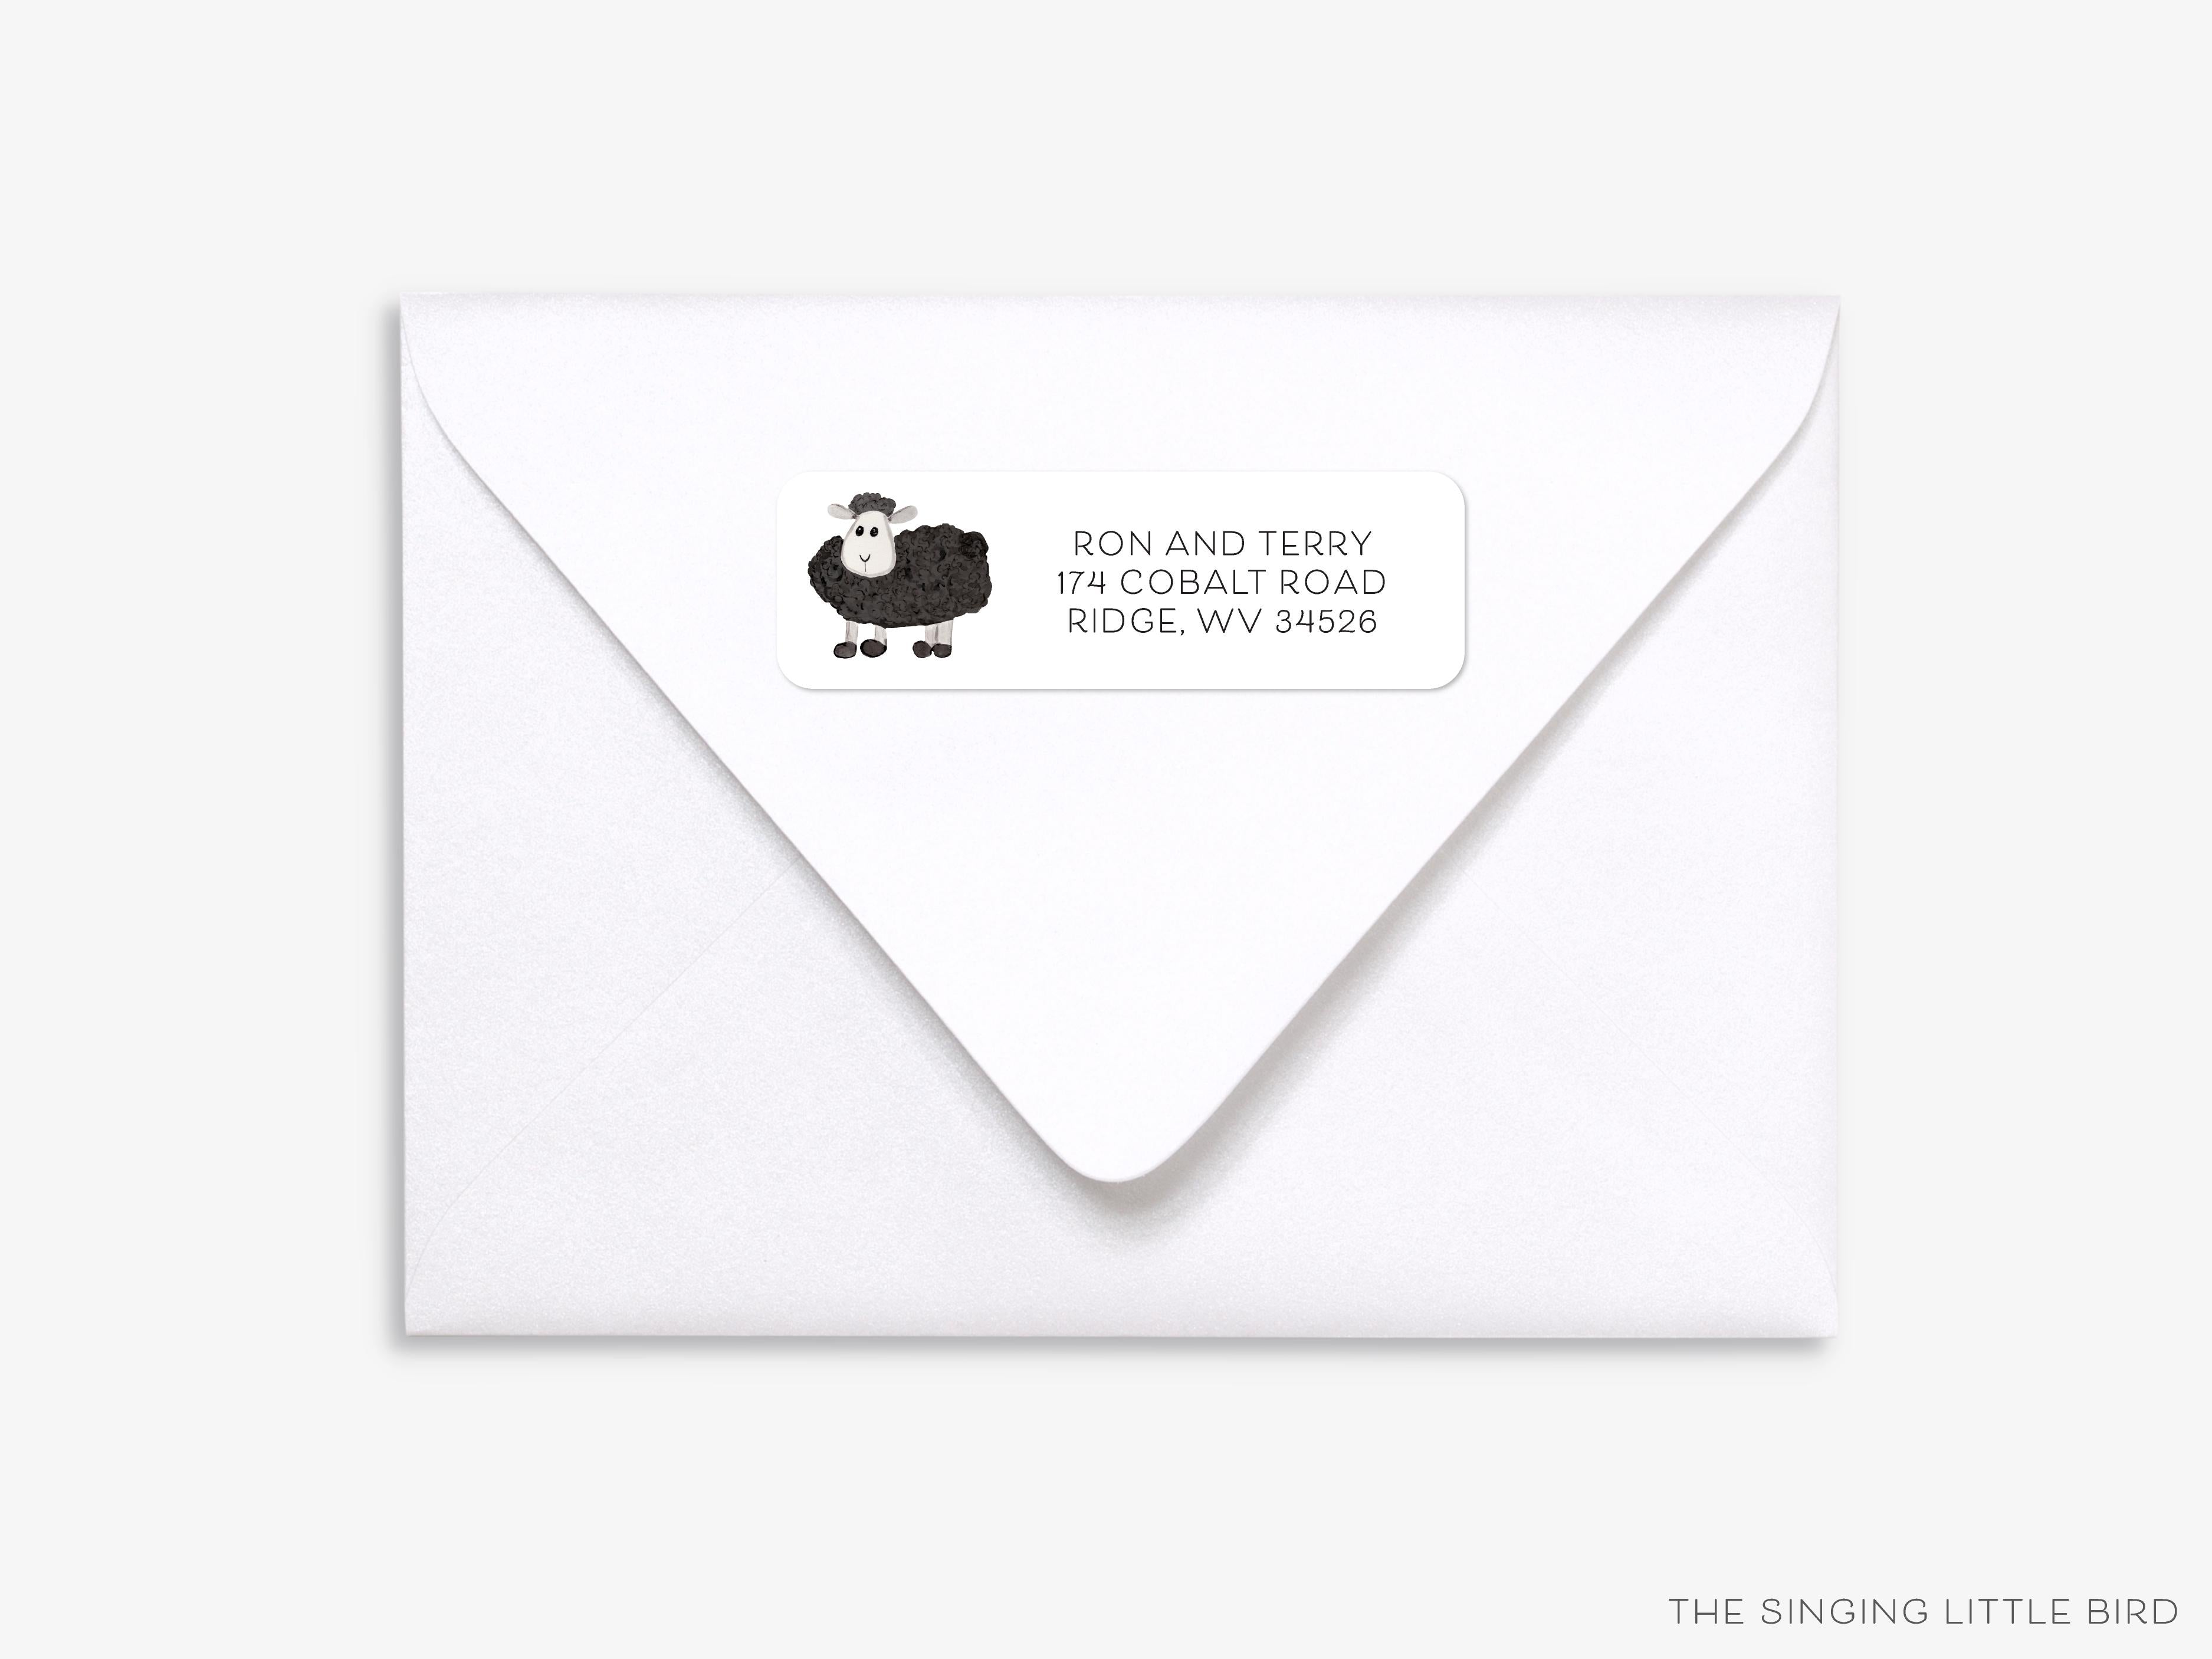 Black Sheep Return Address Labels- These personalized return address labels are 2.625" x 1" and feature our hand-painted watercolor sheep, printed in the USA on beautiful matte finish labels. These make great gifts for yourself or the farm animal lover. -The Singing Little Bird